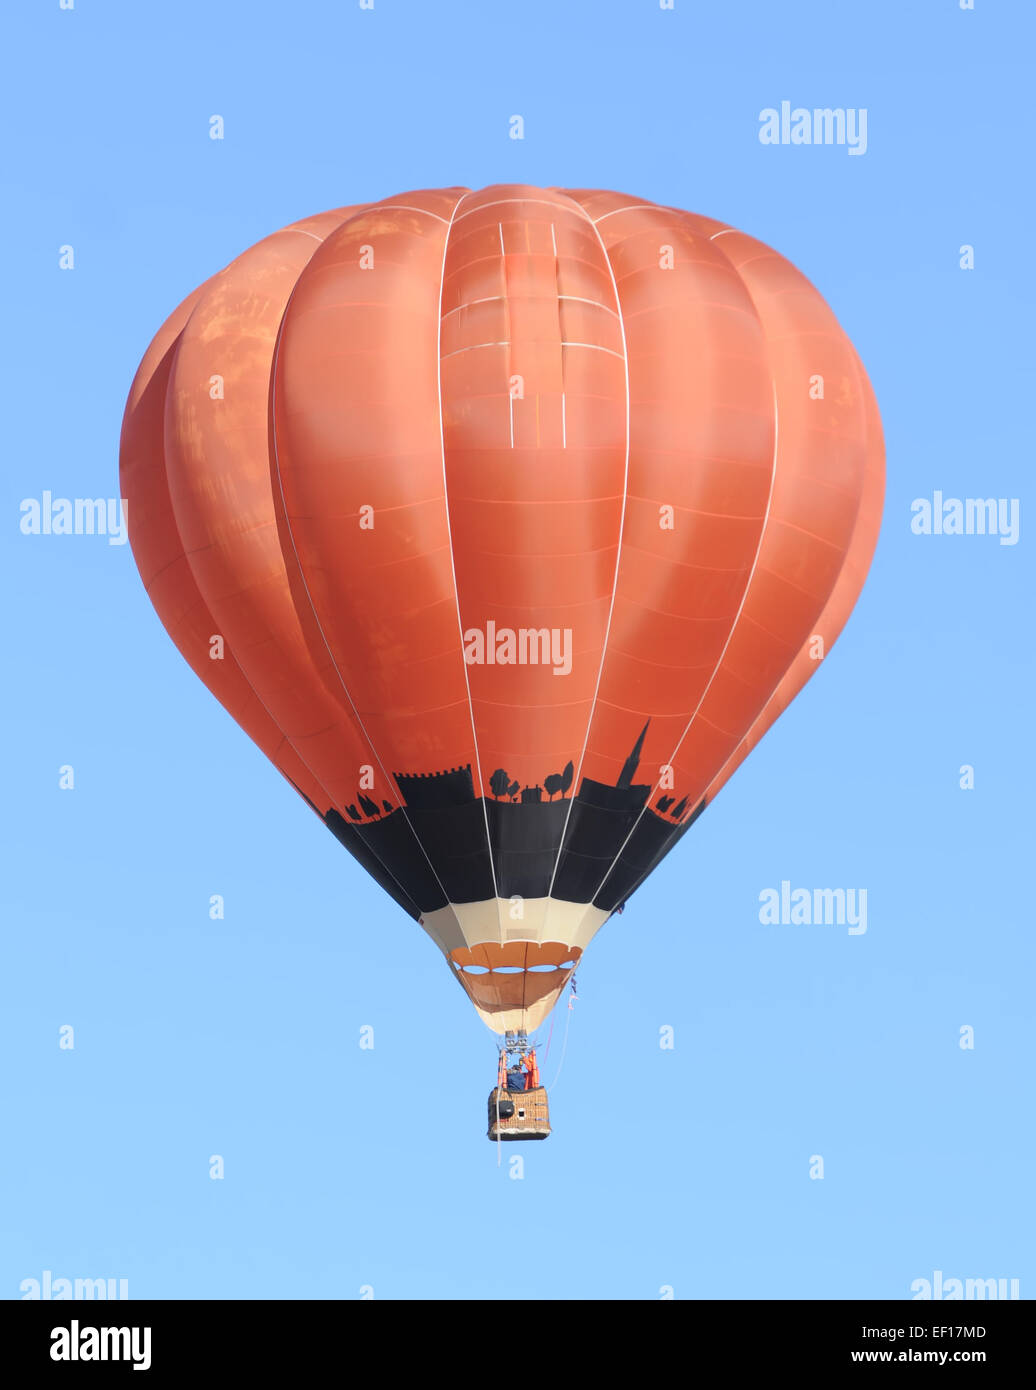 Bright red hot air balloon against blue sky Banque D'Images